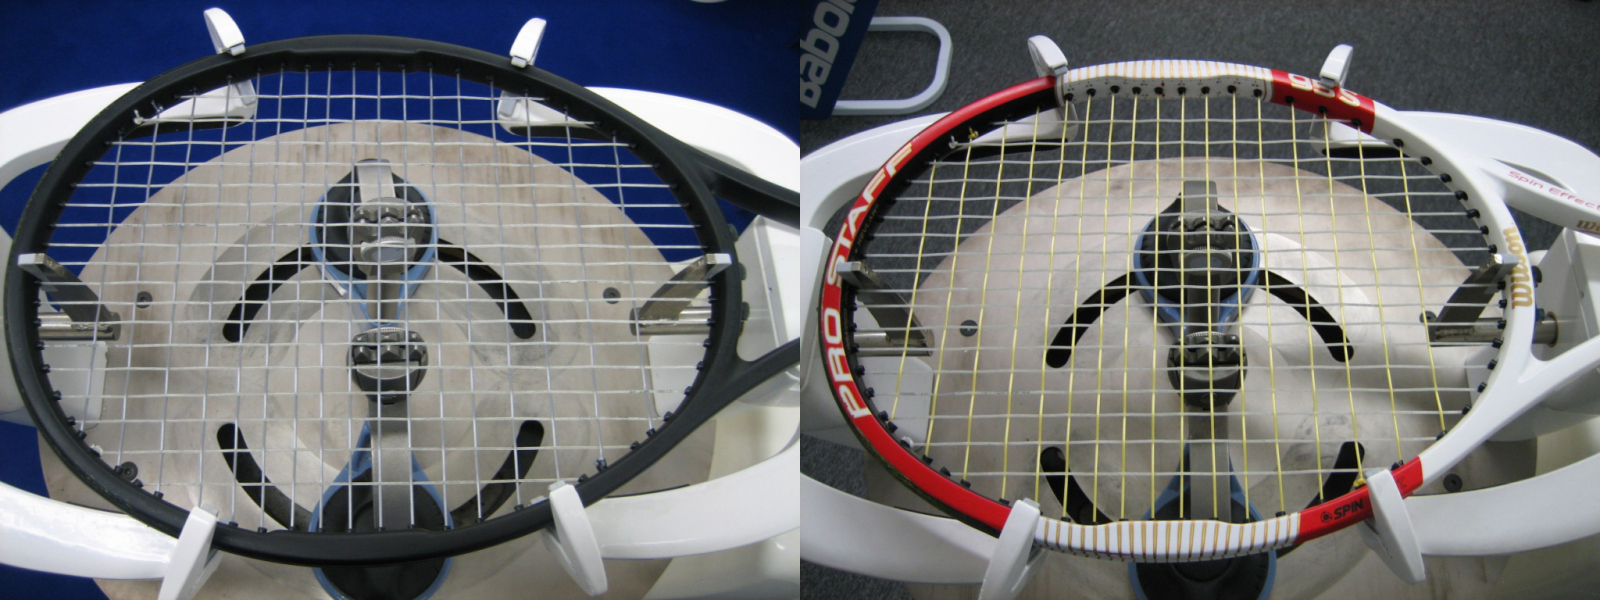 What strings do the pros use? – Tennis Talk